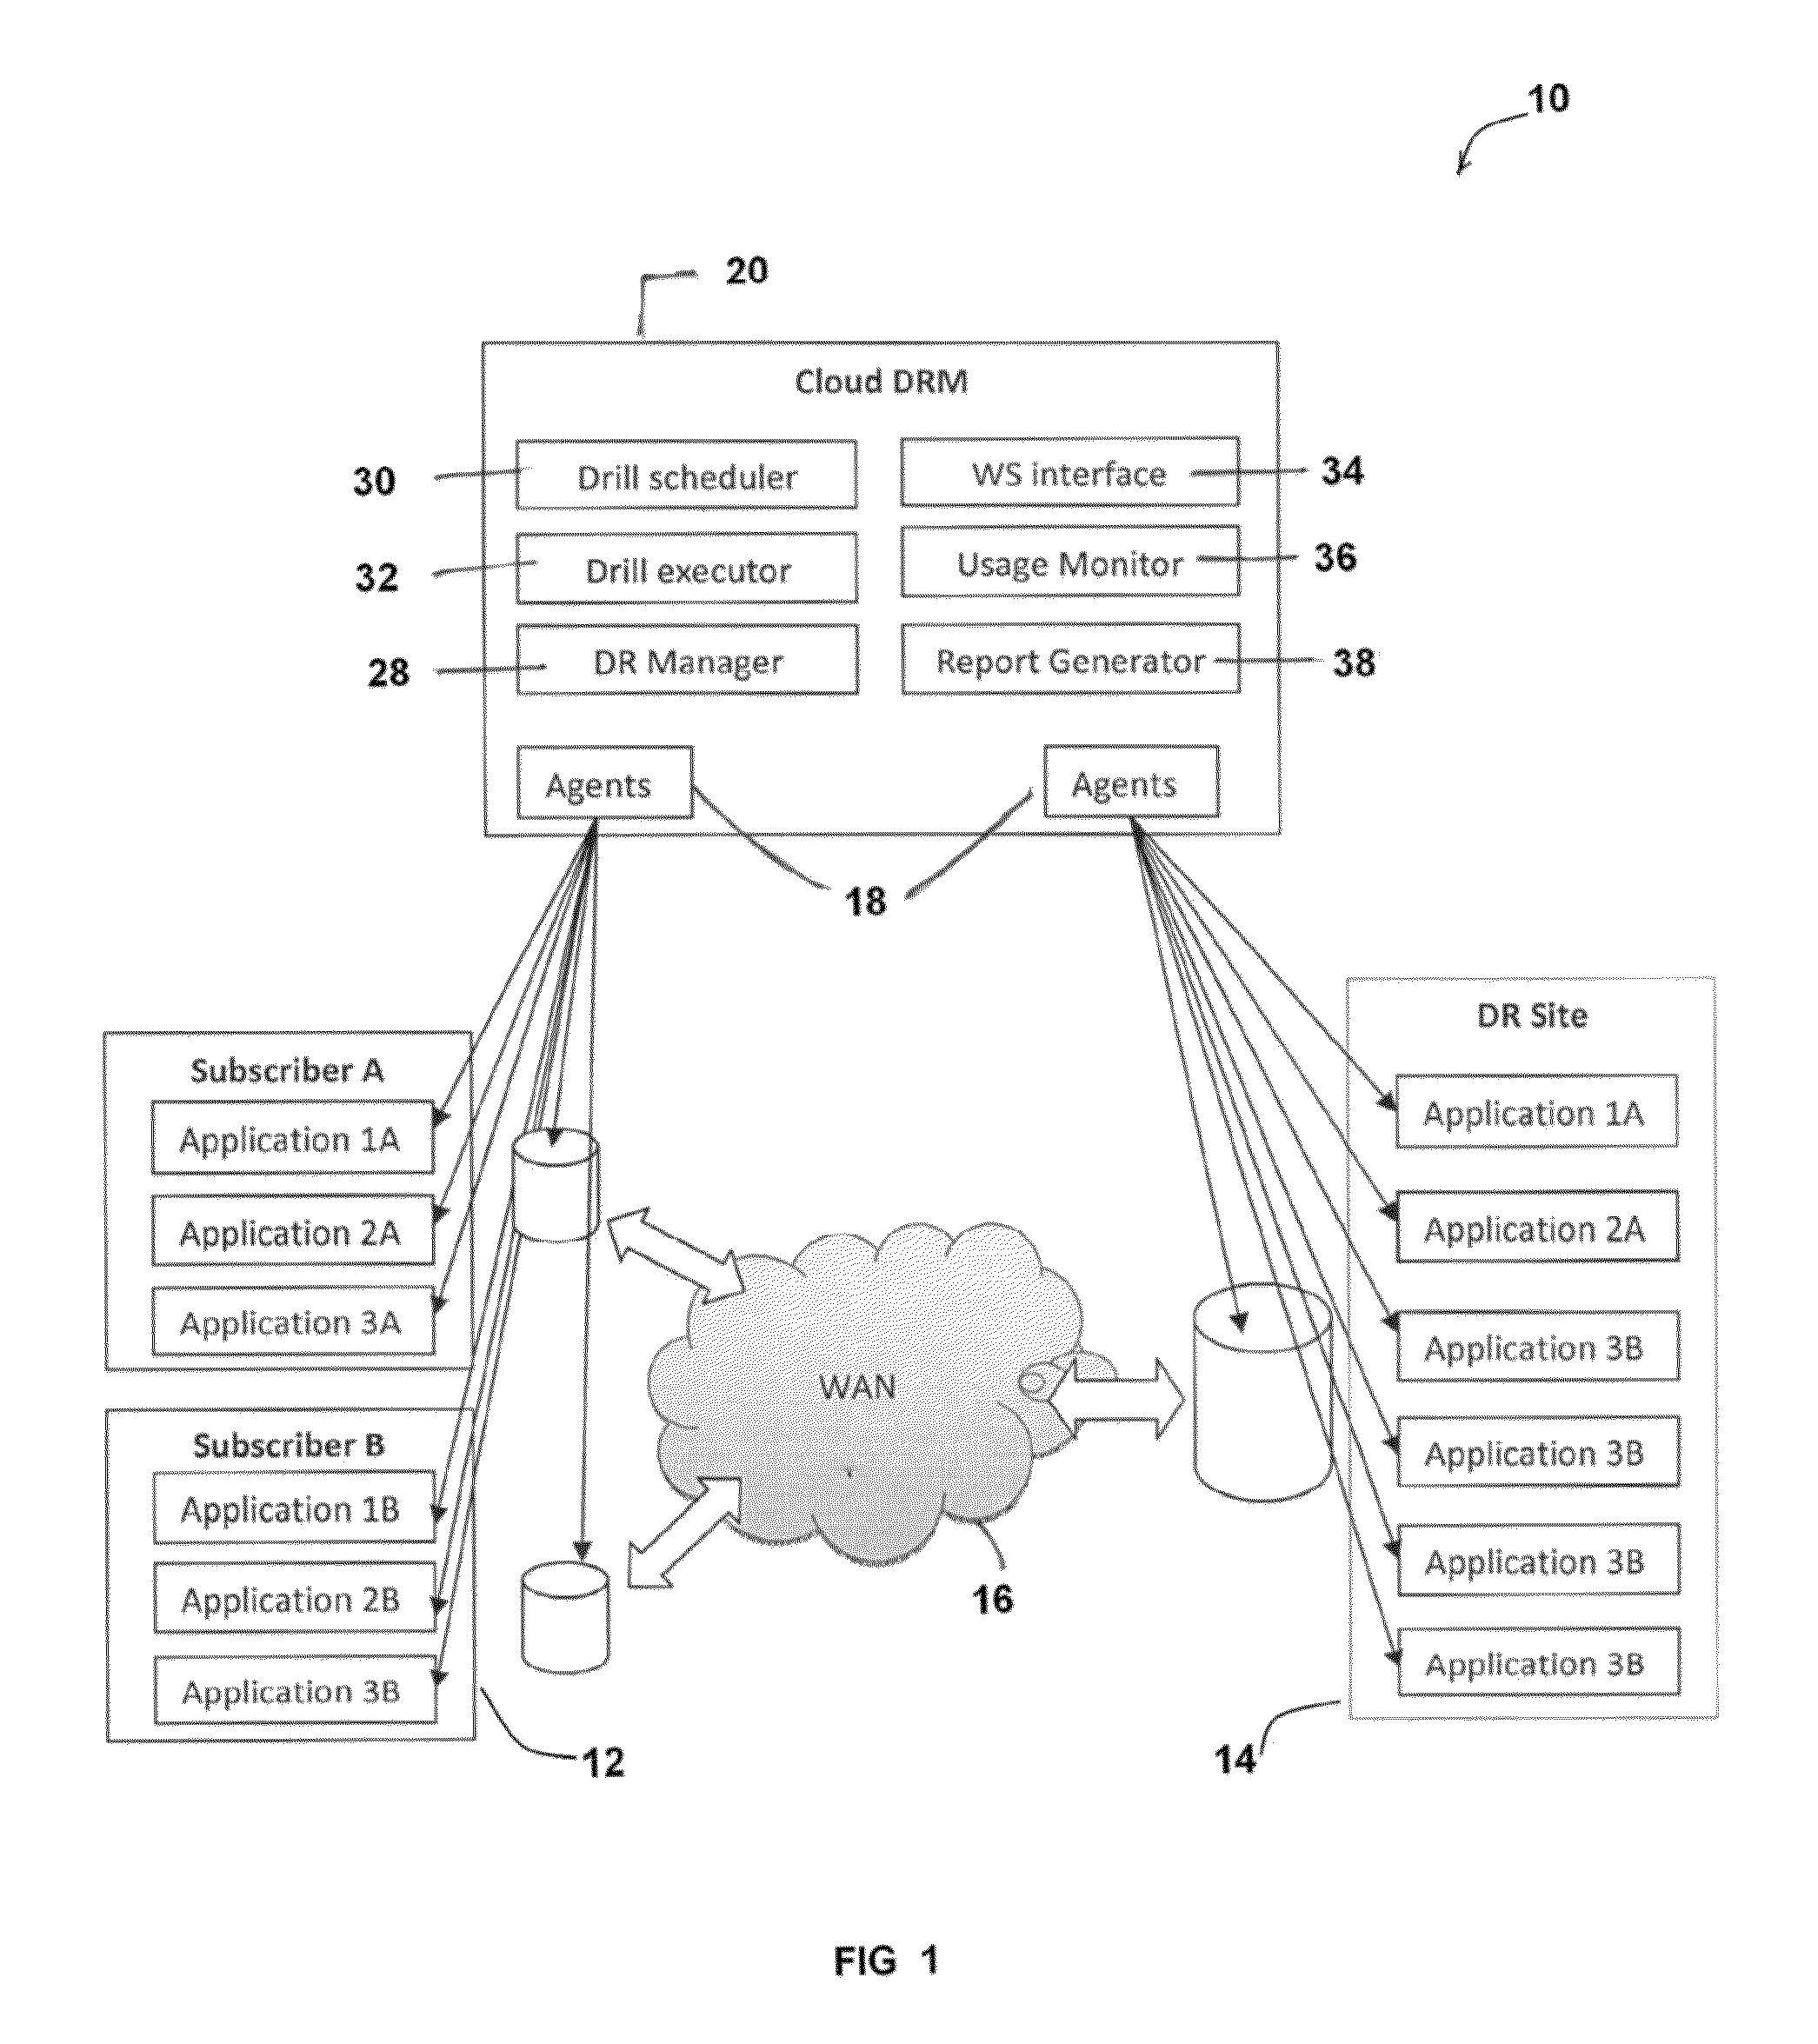 Multi-tenant disaster recovery management system and method for intelligently and optimally allocating computing resources between multiple subscribers